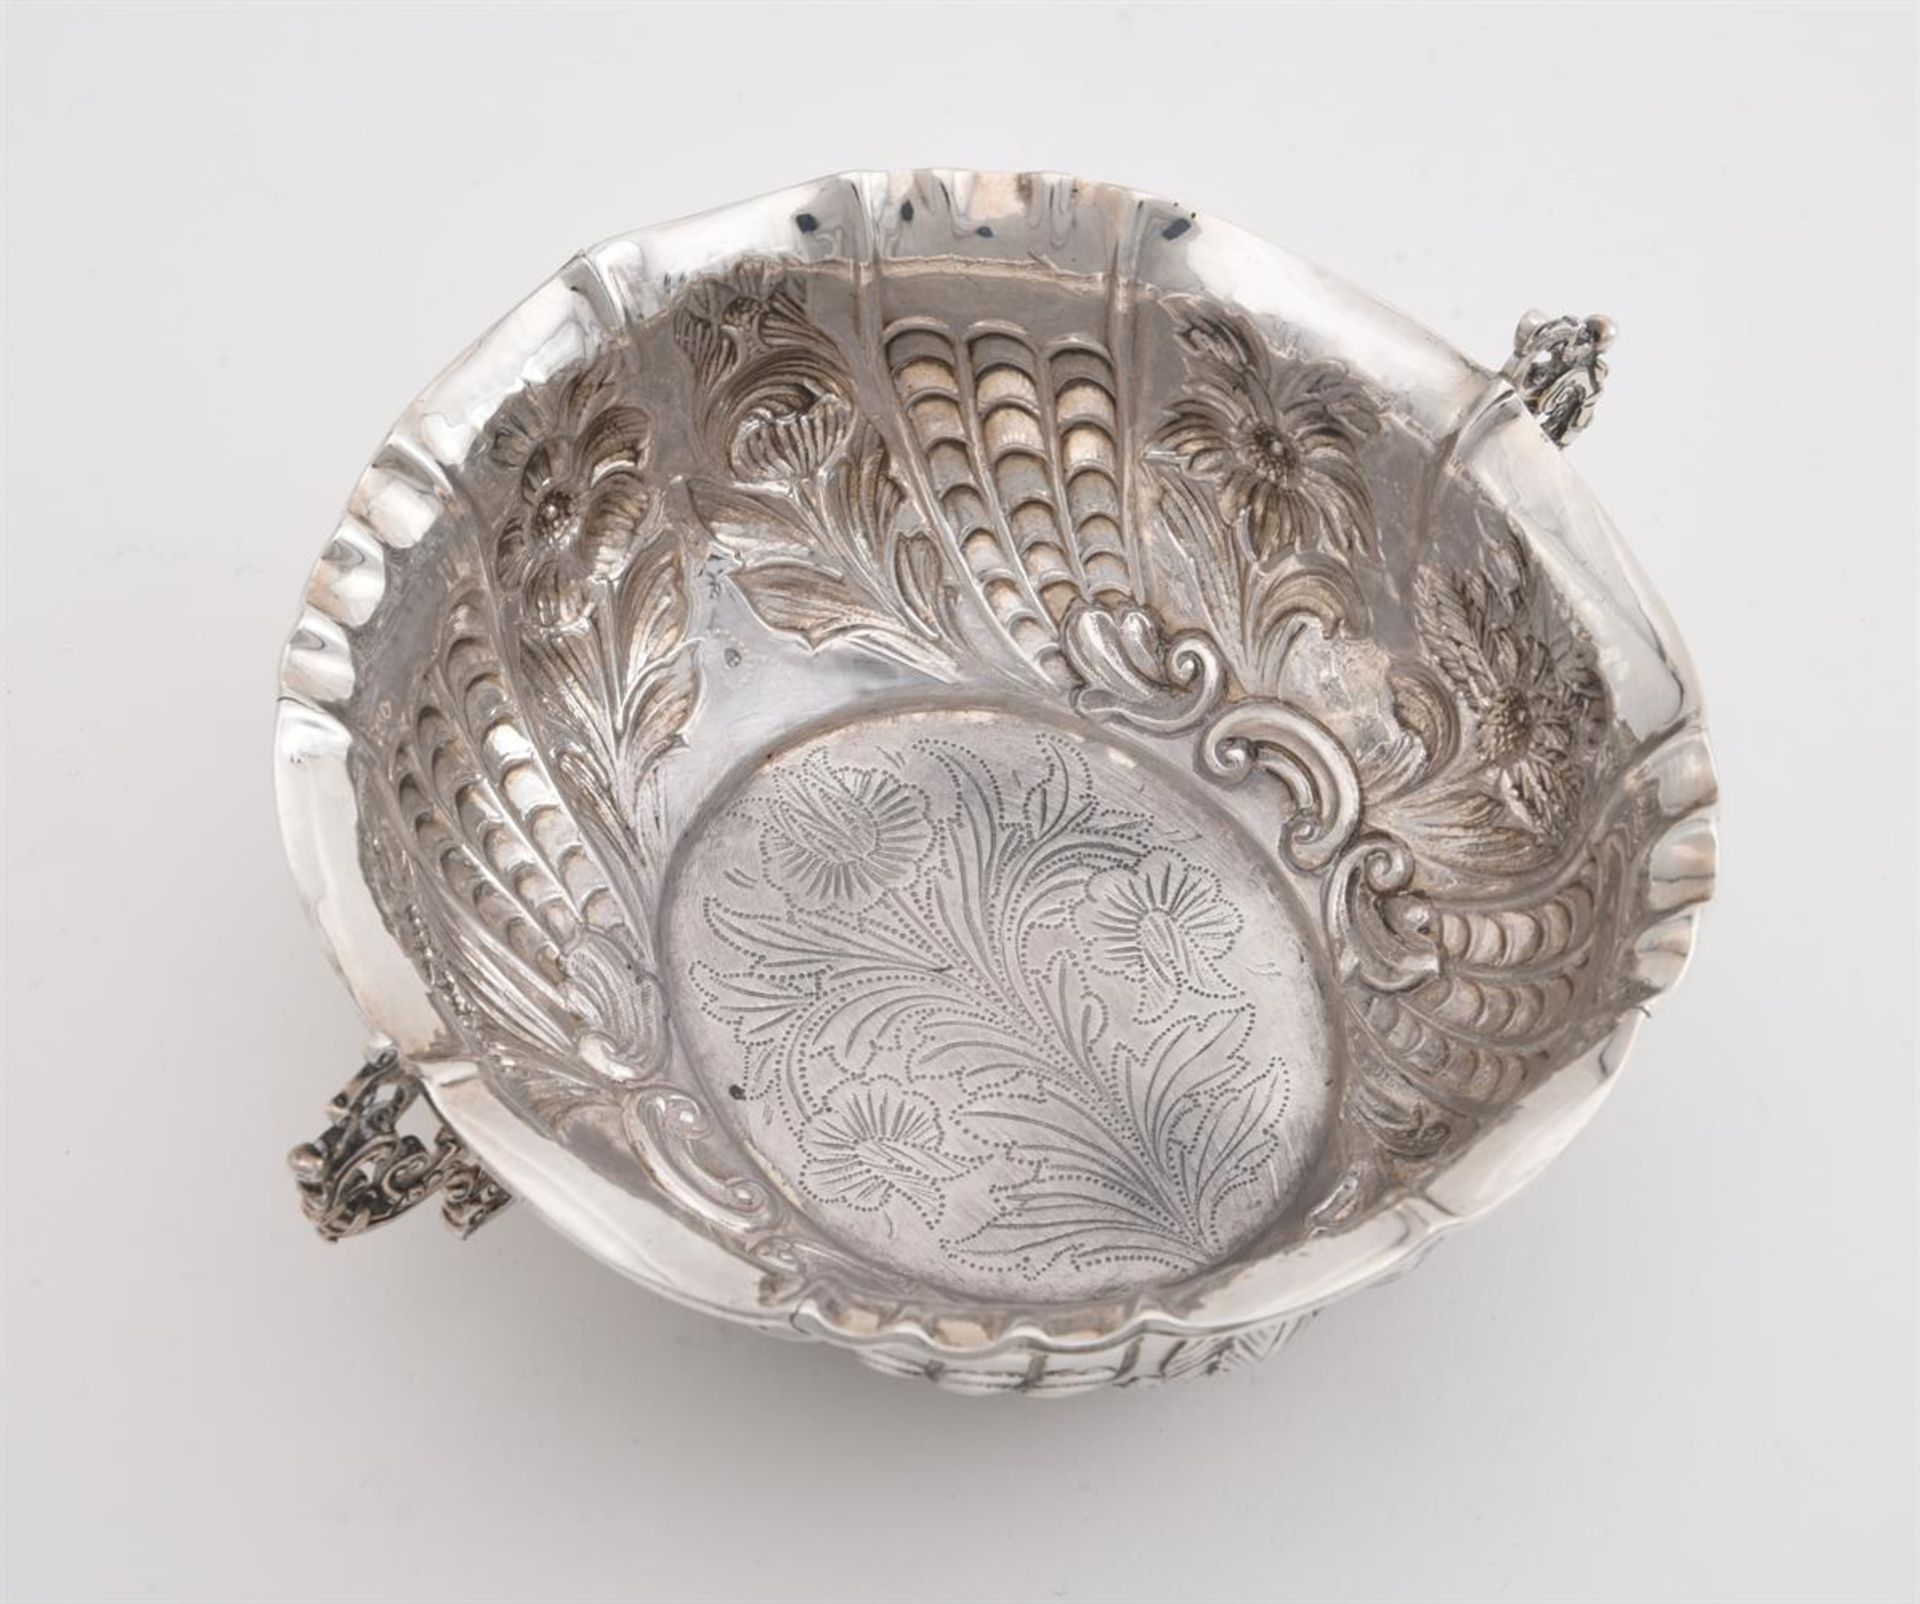 A VICTORIAN SILVER DISH IN THE DUTCH 17TH CENTURY STYLE, CHARLES STUART HARRIS - Image 3 of 5